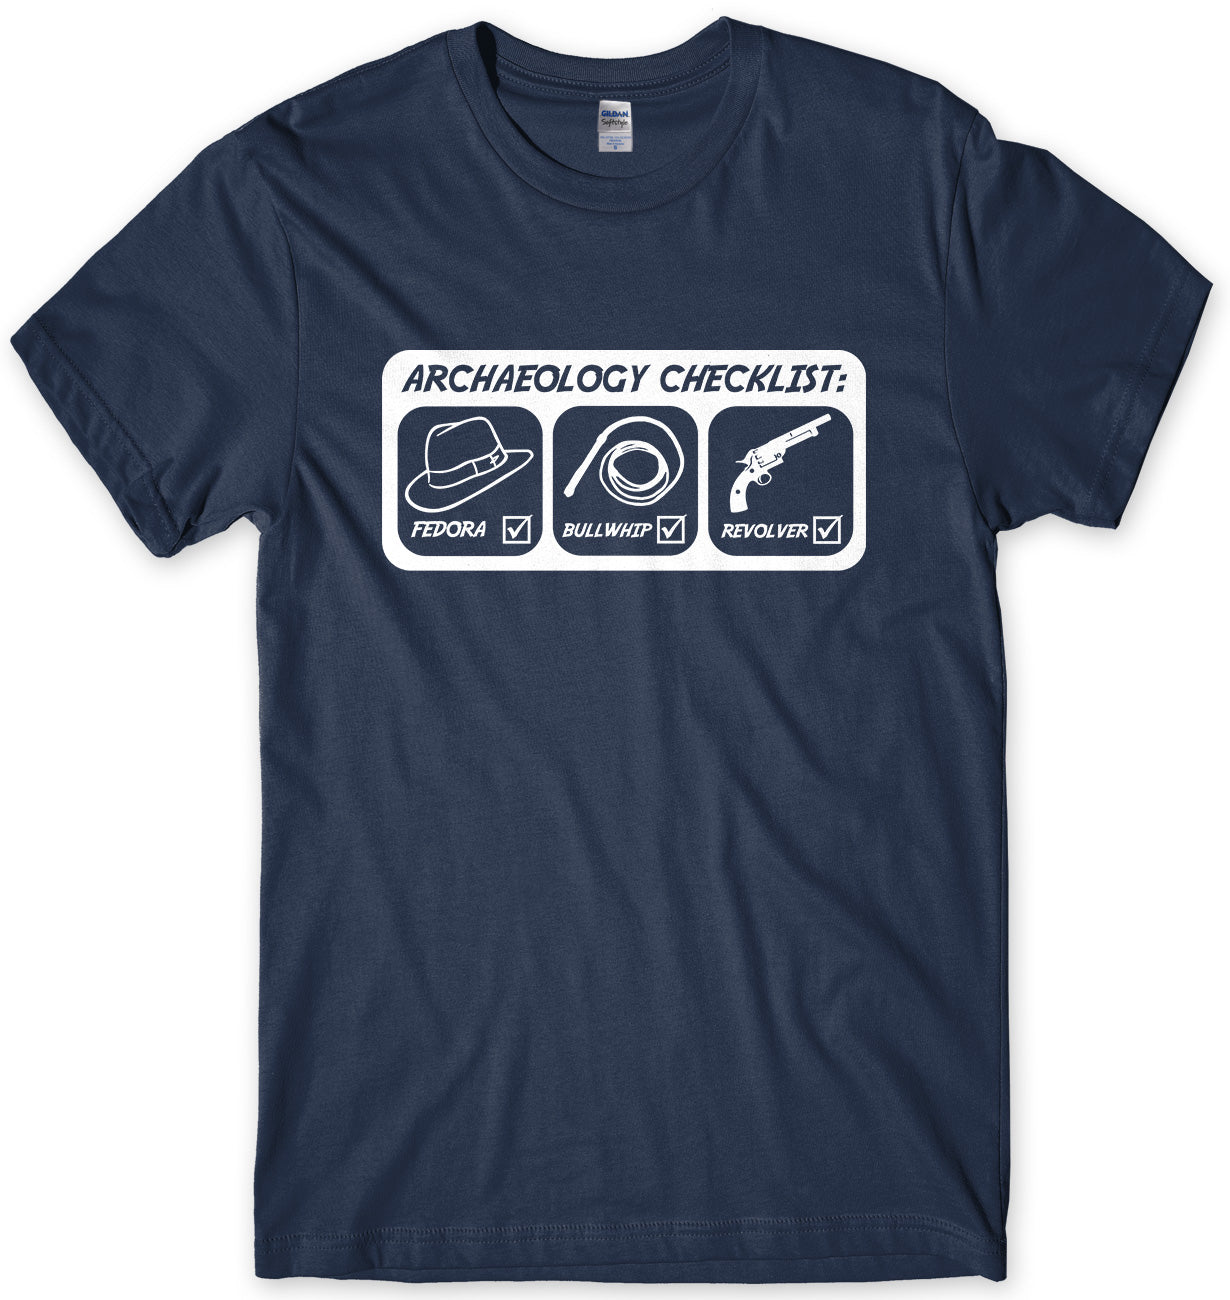 ARCHAEOLOGY CHECKLIST - INSPIRED BY INDIANA JONES MENS UNISEX T-SHIRT